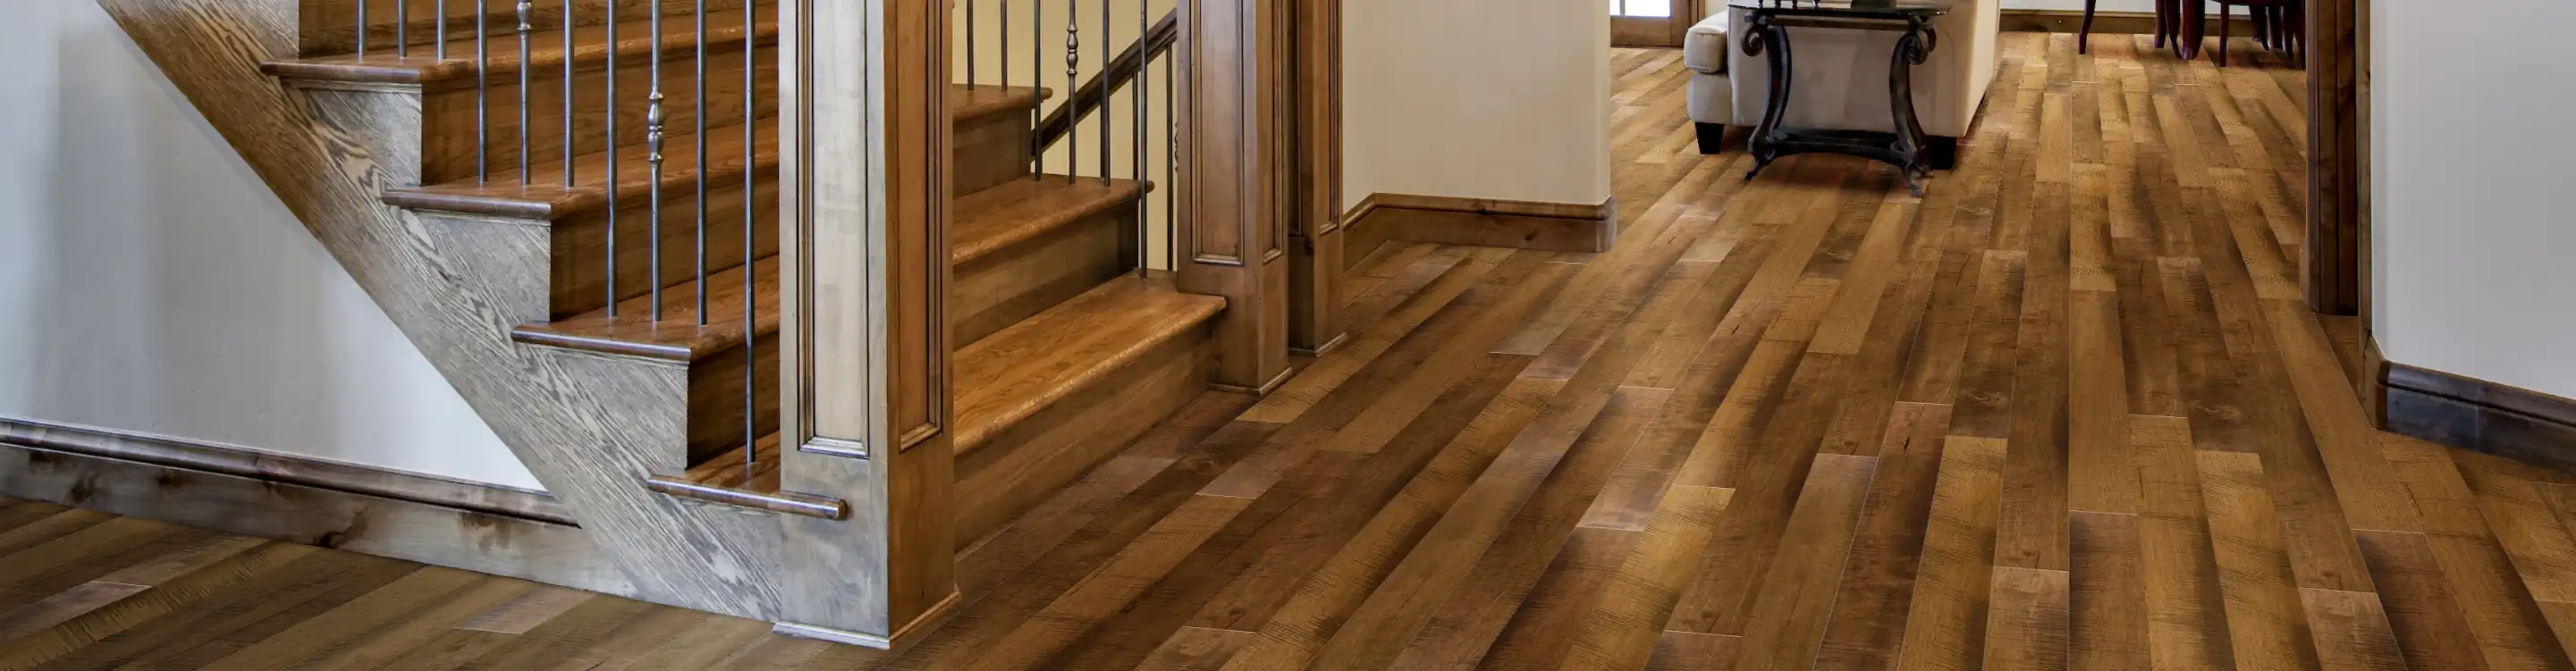 hardwood floors and stairs in an entryway